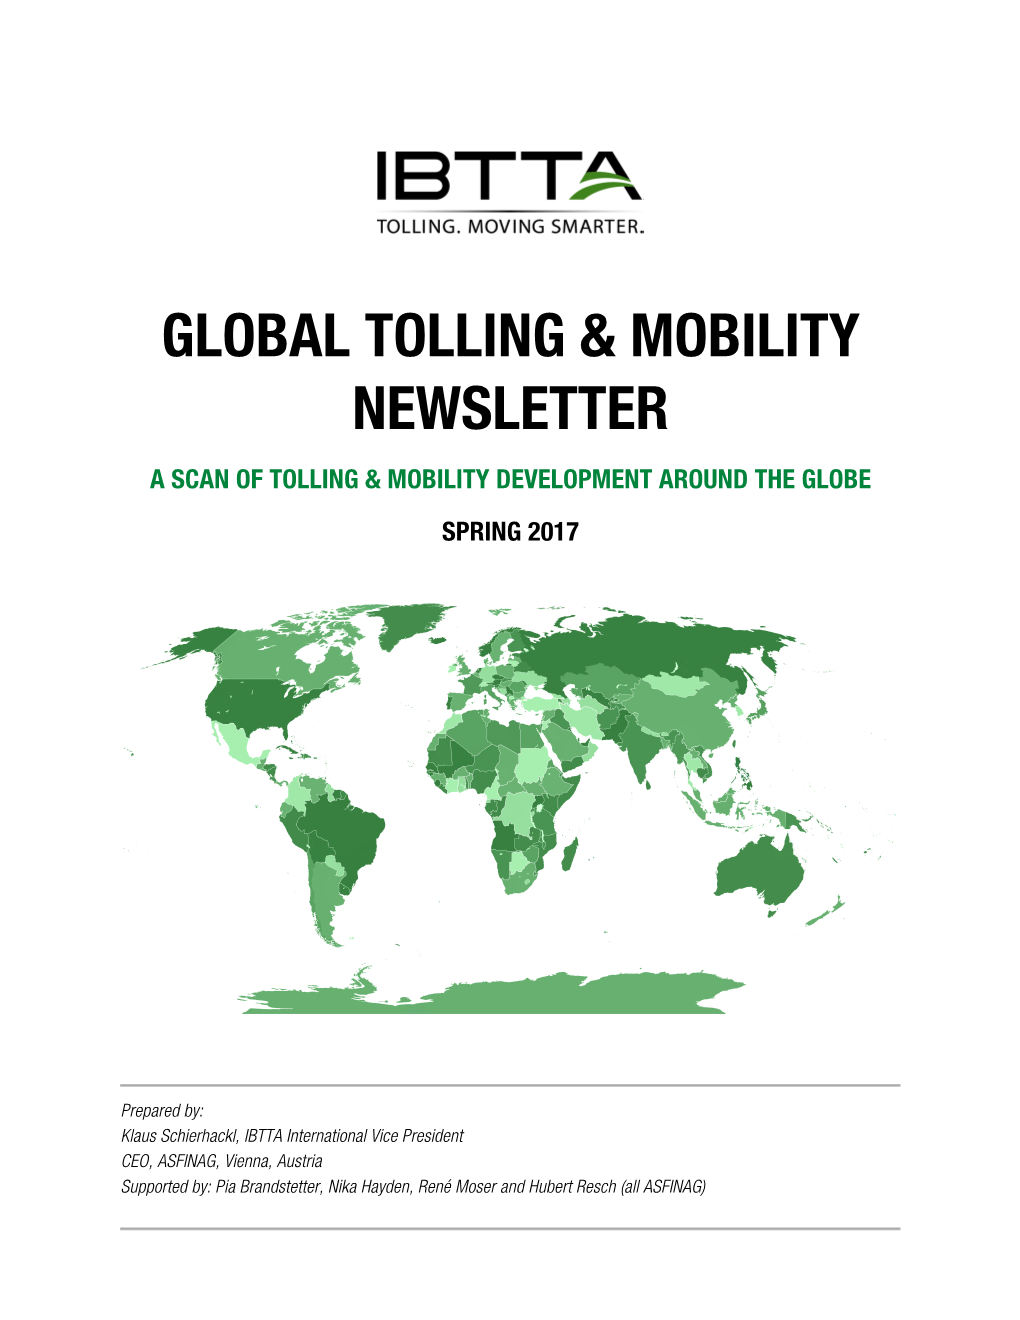 Global Tolling & Mobility Newsletter